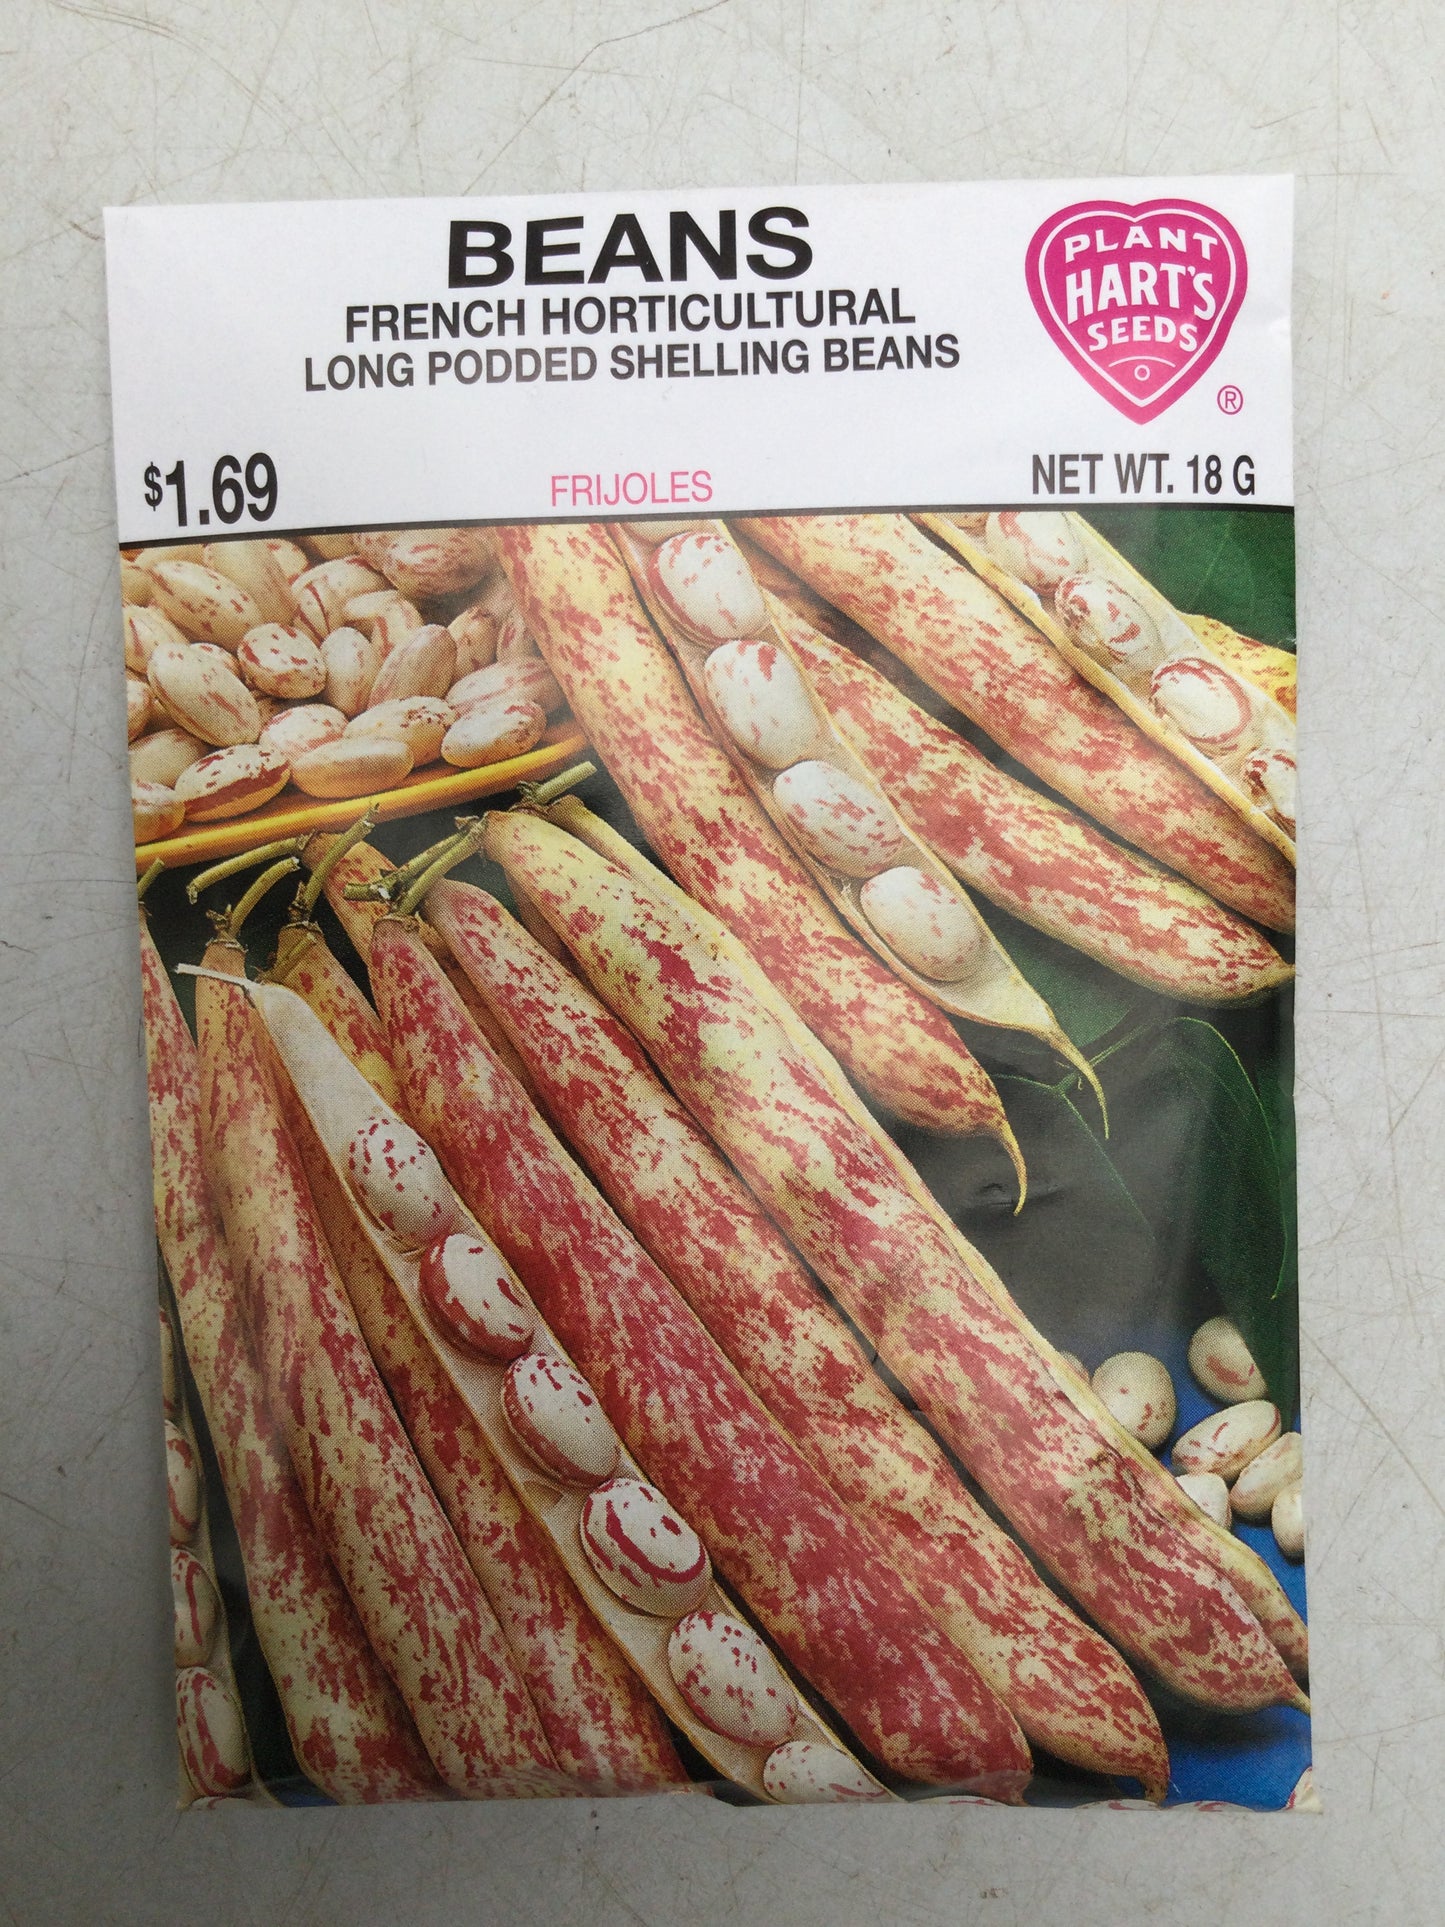 Bean French Horticultural